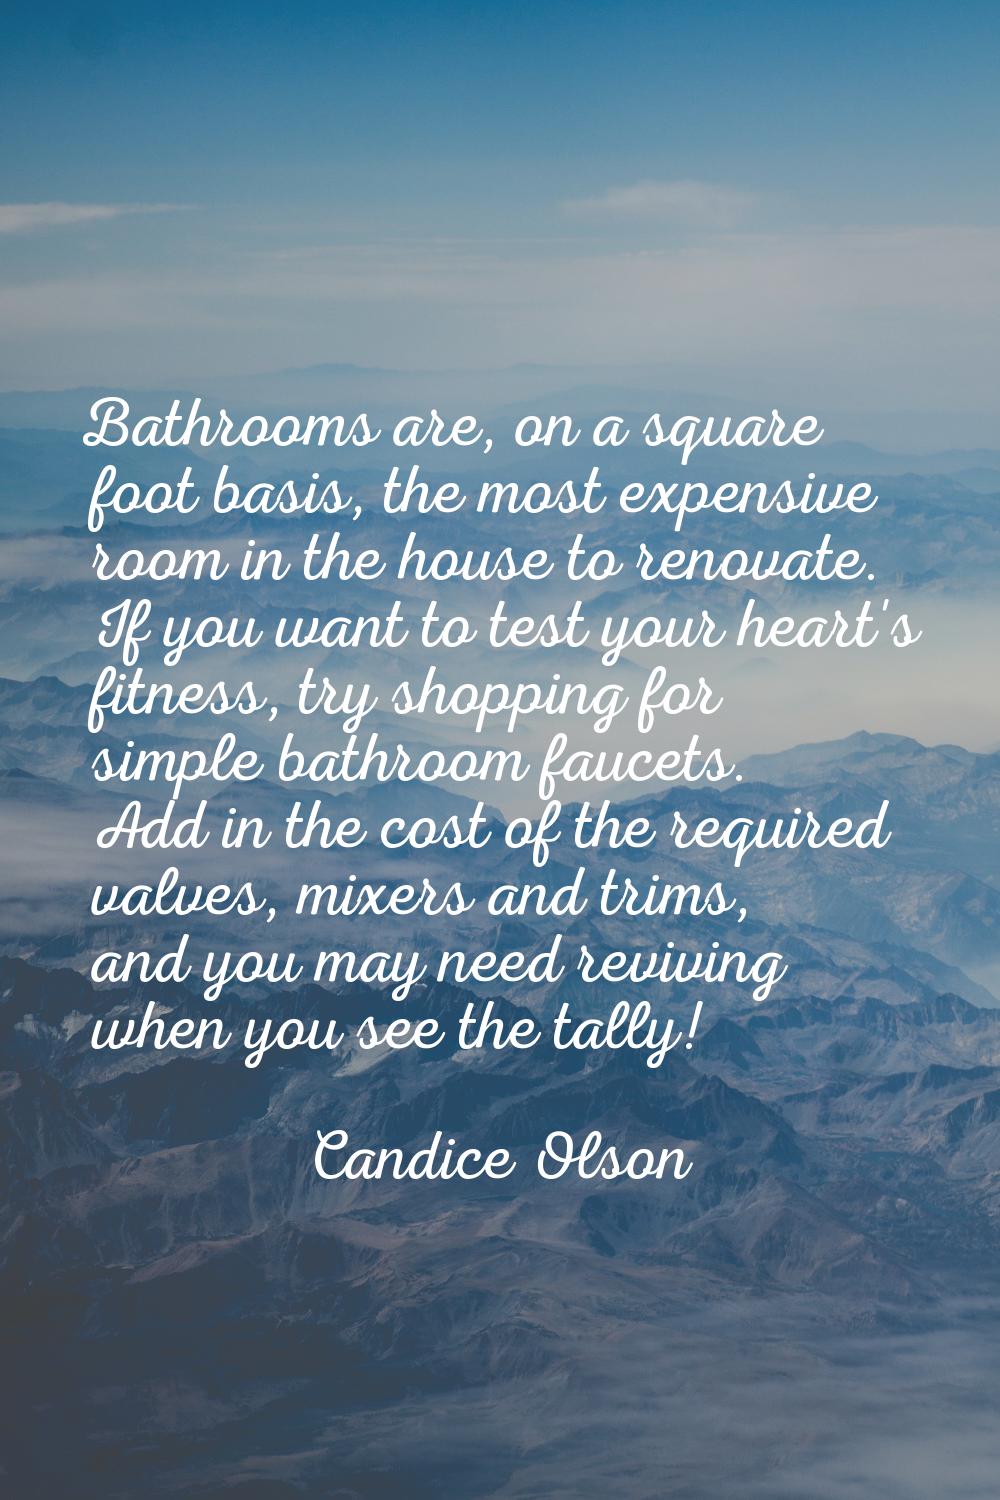 Bathrooms are, on a square foot basis, the most expensive room in the house to renovate. If you wan